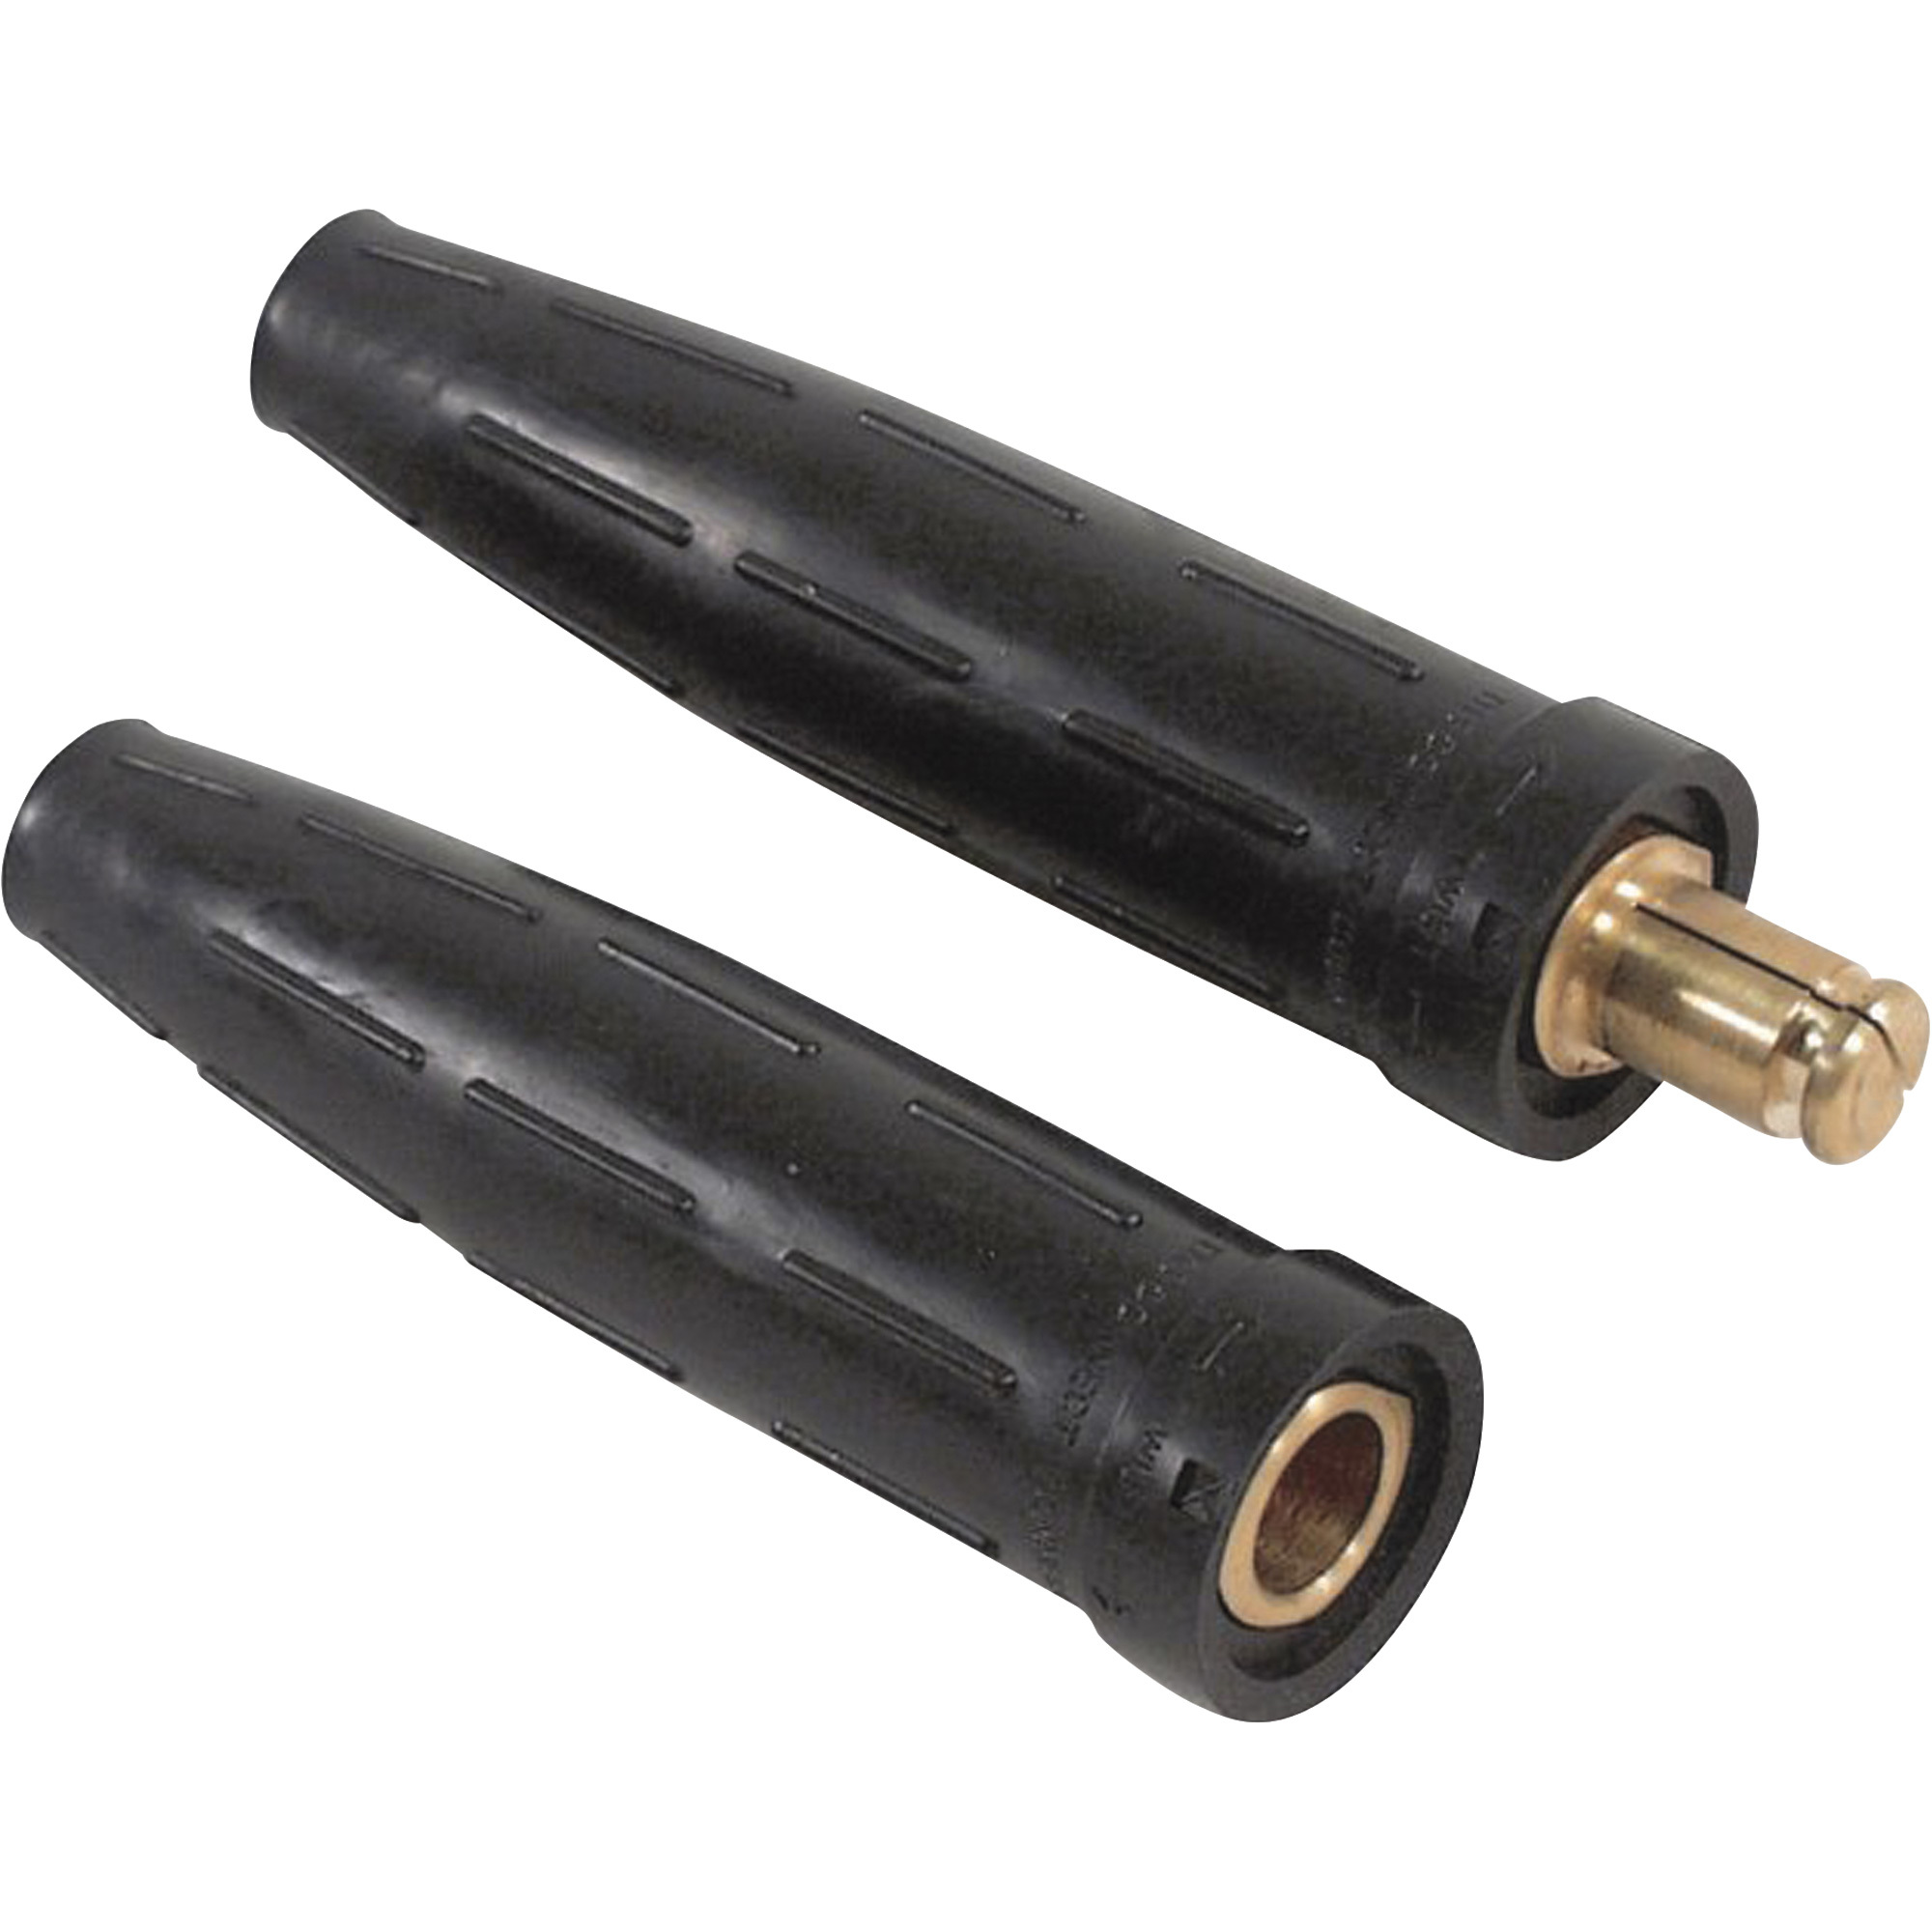 Hobart Welding Cable Connector â For No. 4 to No. 1 Cable, Model 770032